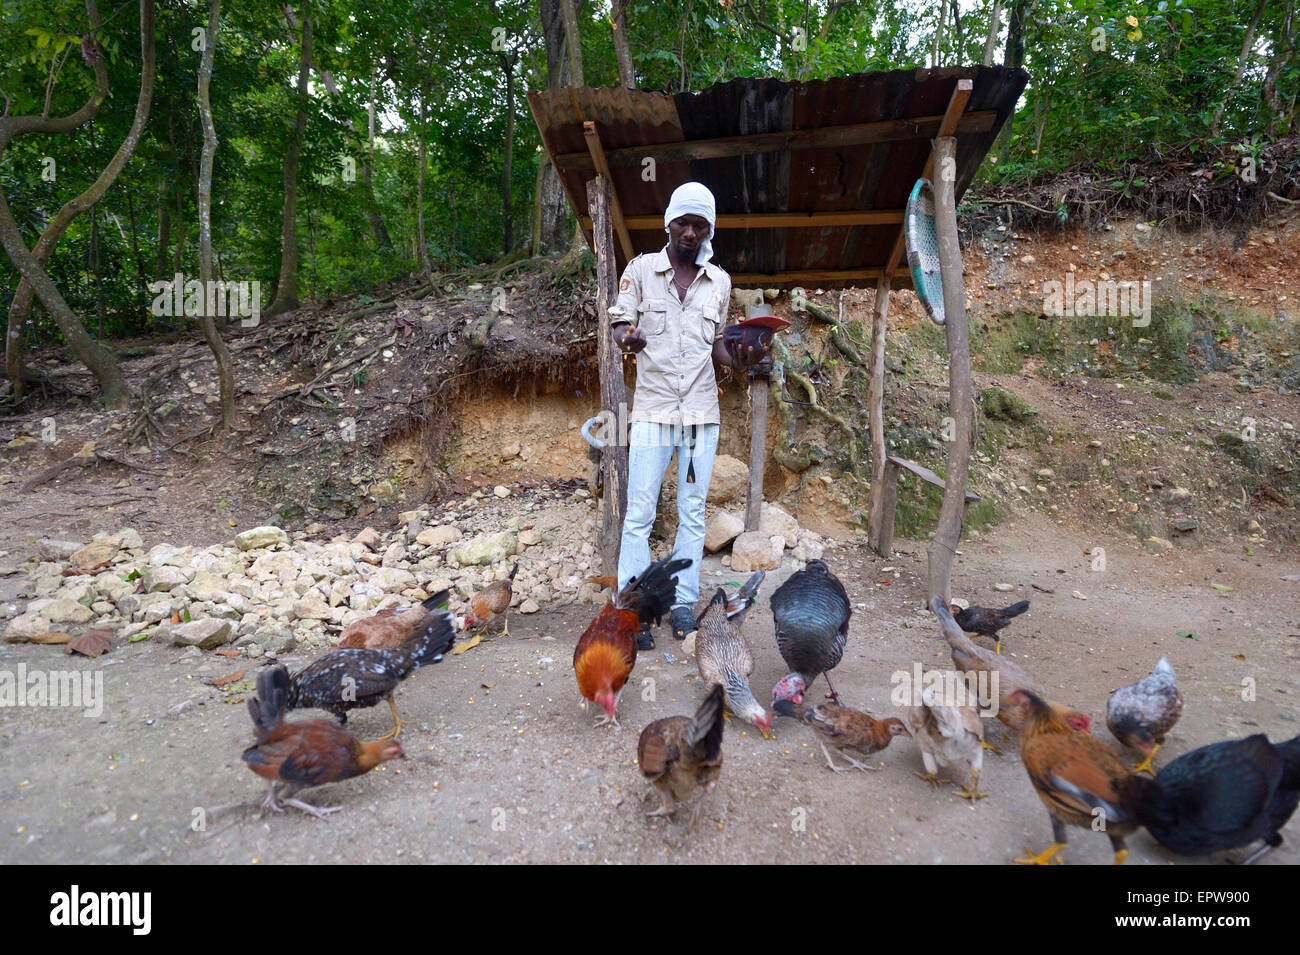 Man feeding his chickens, Riviere Froide, Ouest Department, Haiti Stock Photo